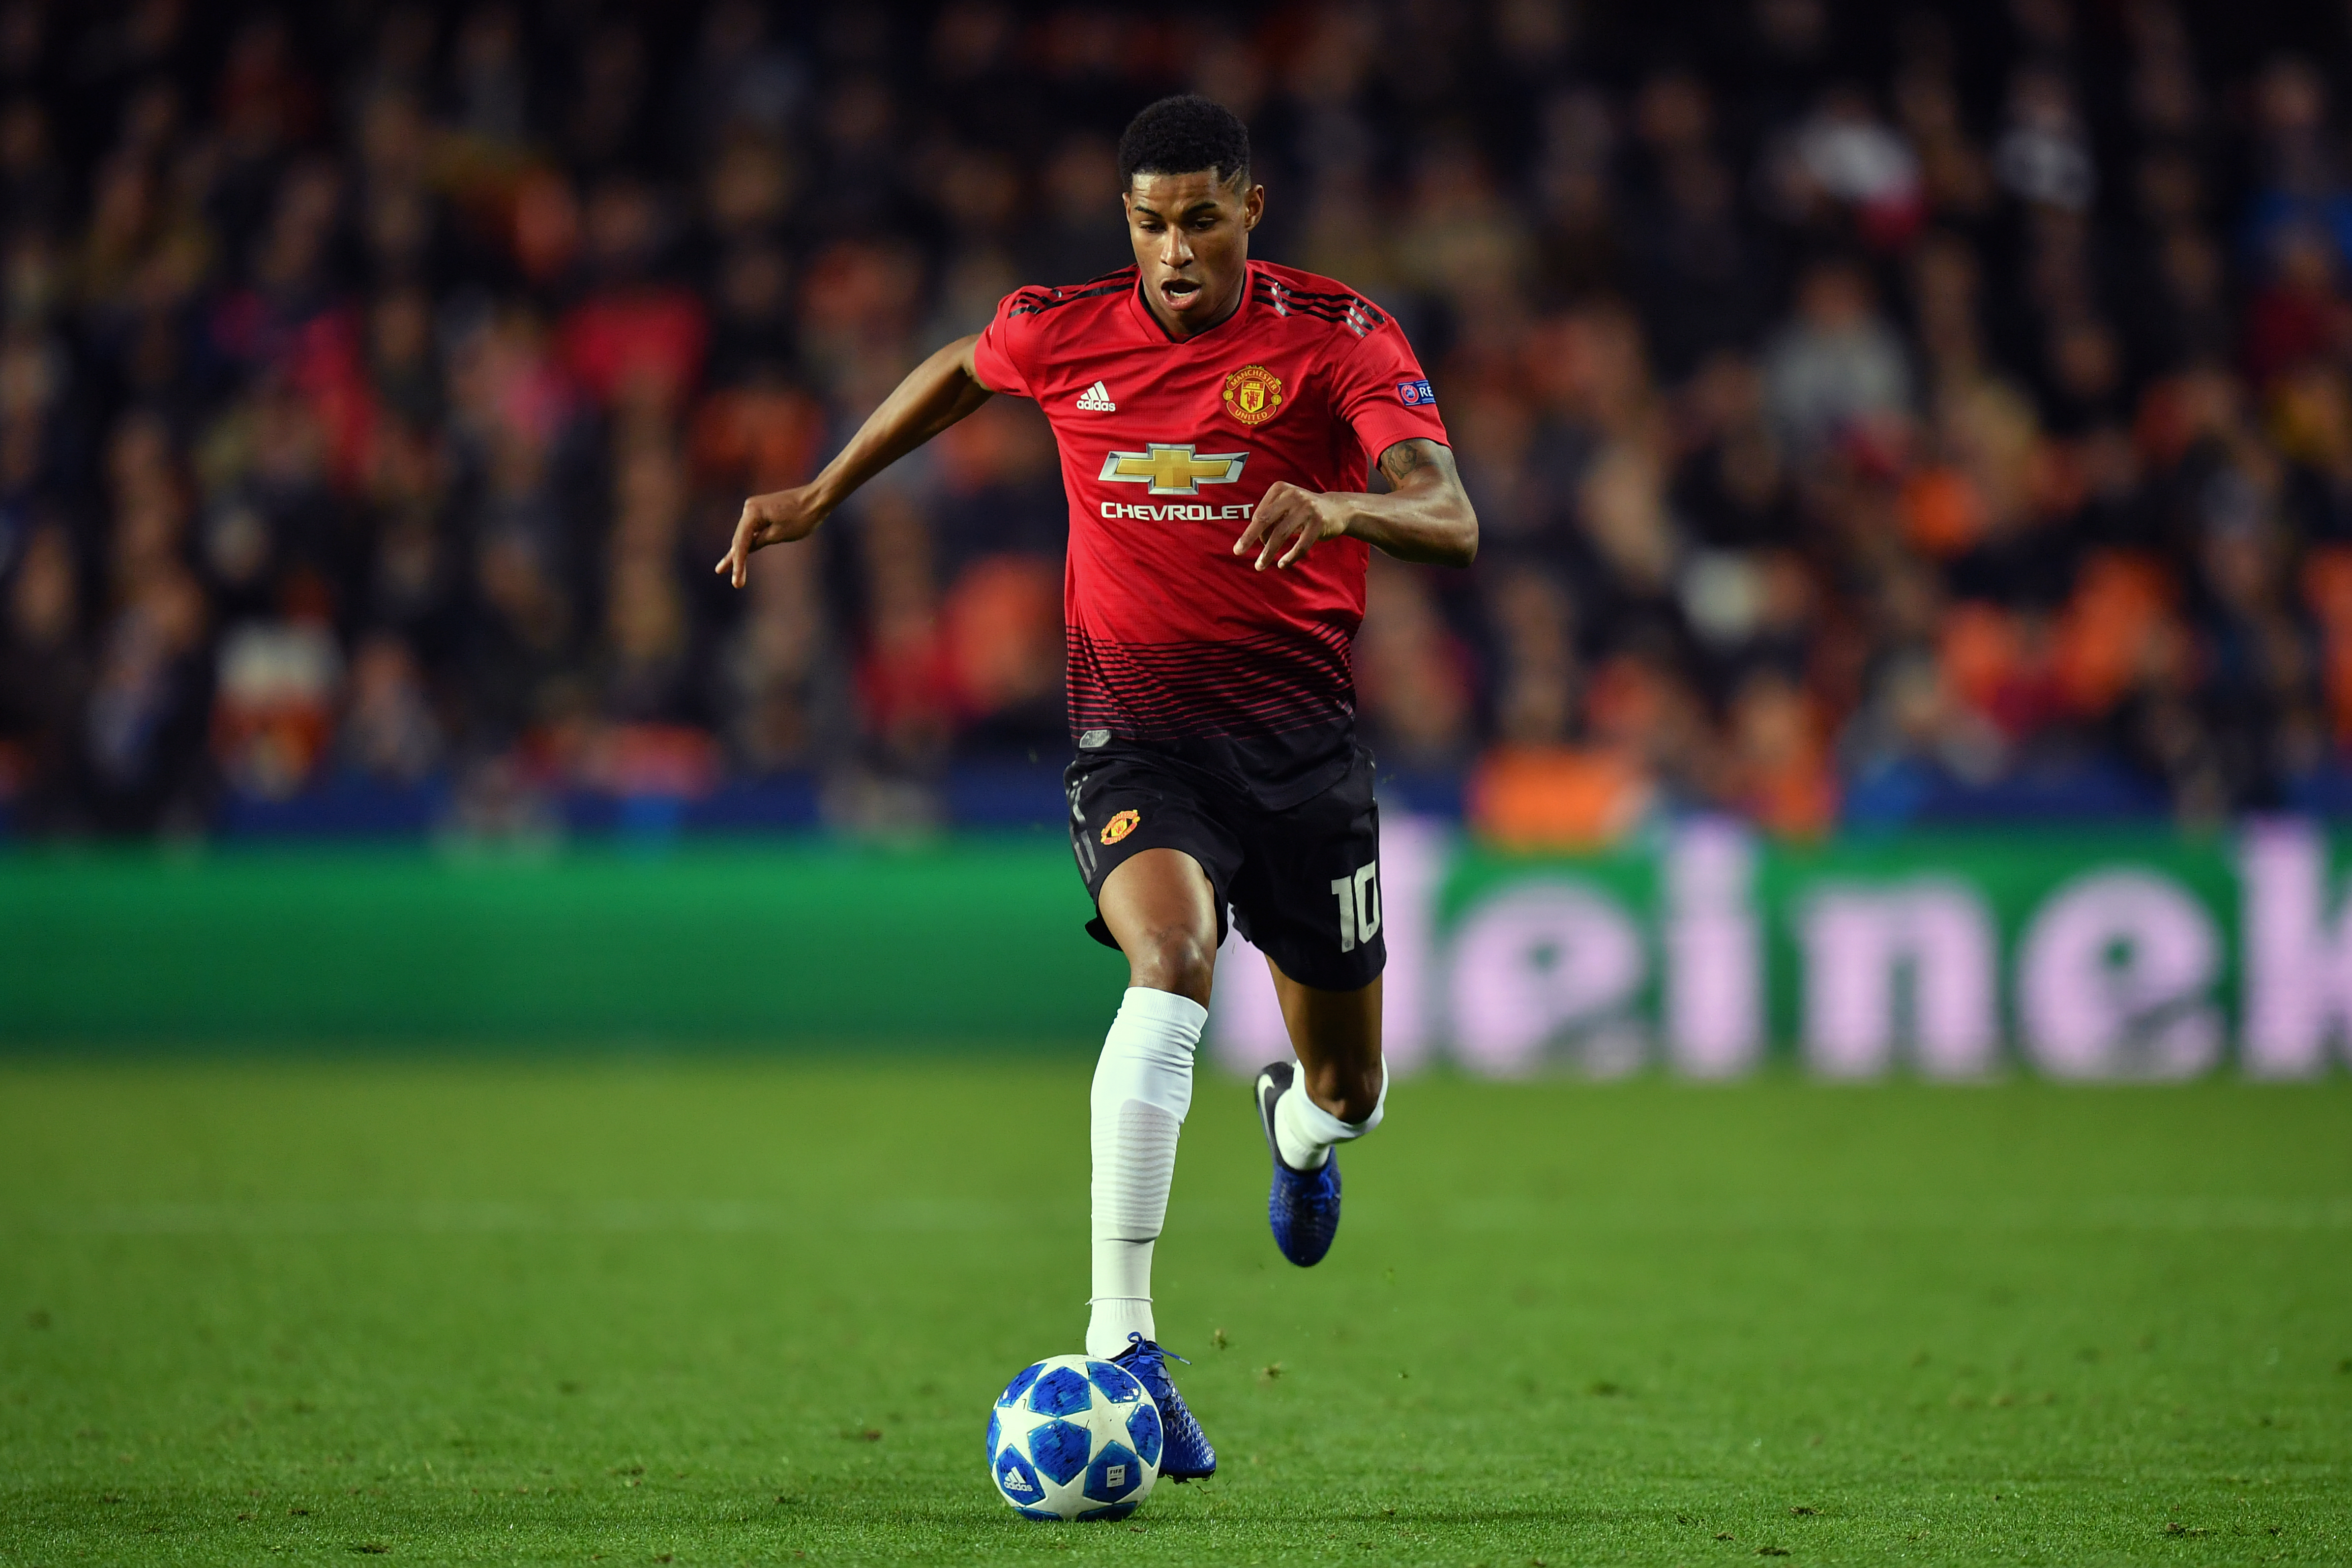 VALENCIA, SPAIN - DECEMBER 12:  Marcus Rashford of Manchester United controls the ball during the UEFA Champions League Group H match between Valencia and Manchester United at Estadio Mestalla on December 12, 2018 in Valencia, Spain. (Photo by Dan Mullan/Getty Images)